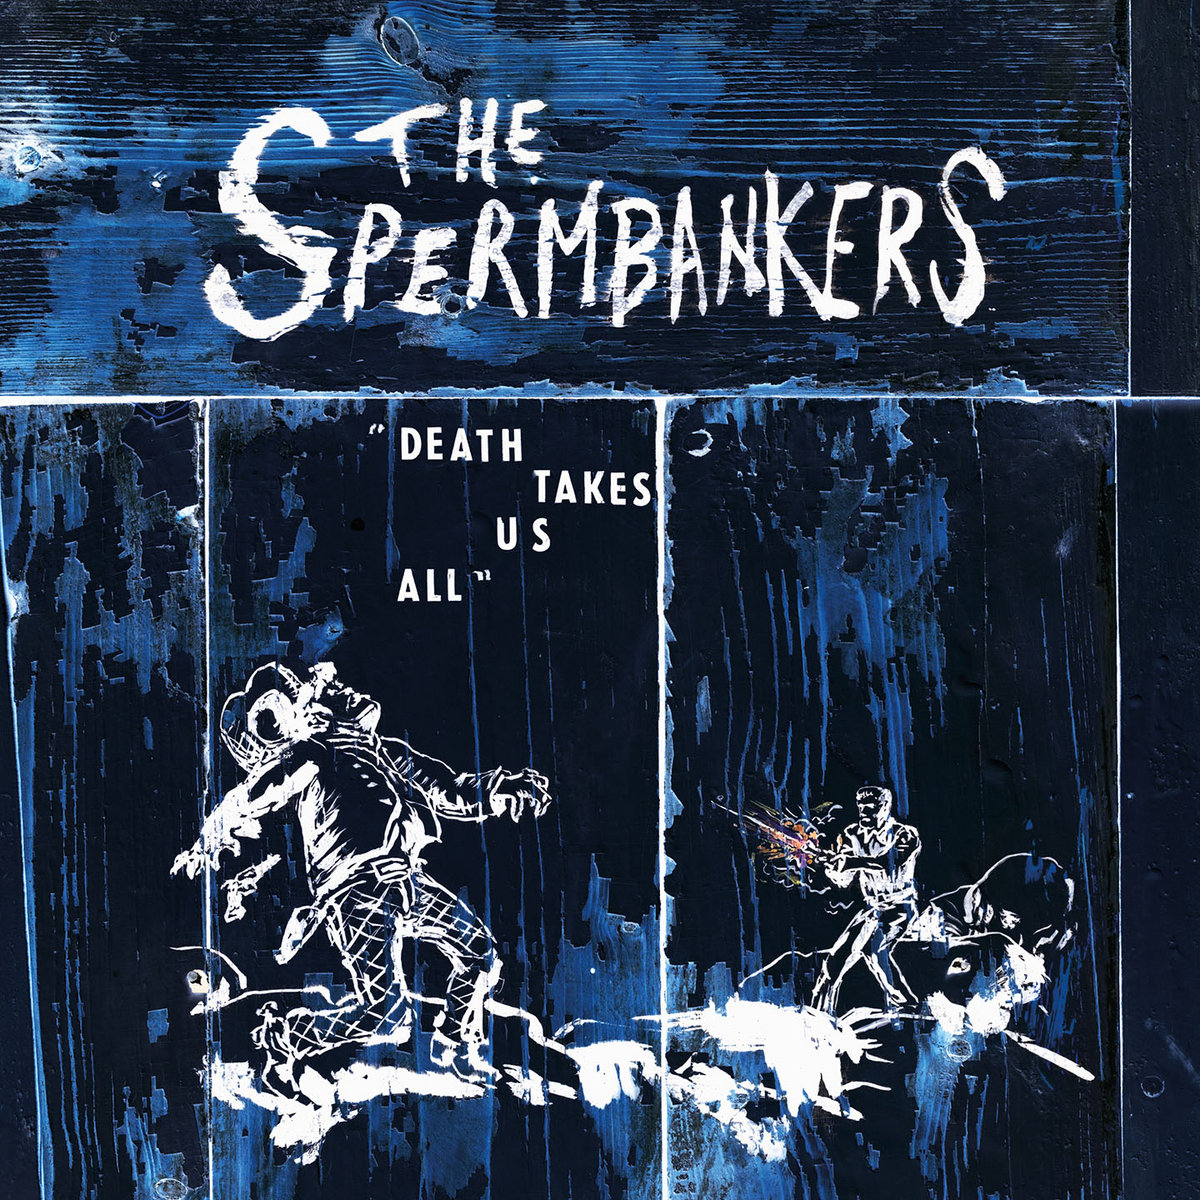 Spermbankers – Death Takes Us All